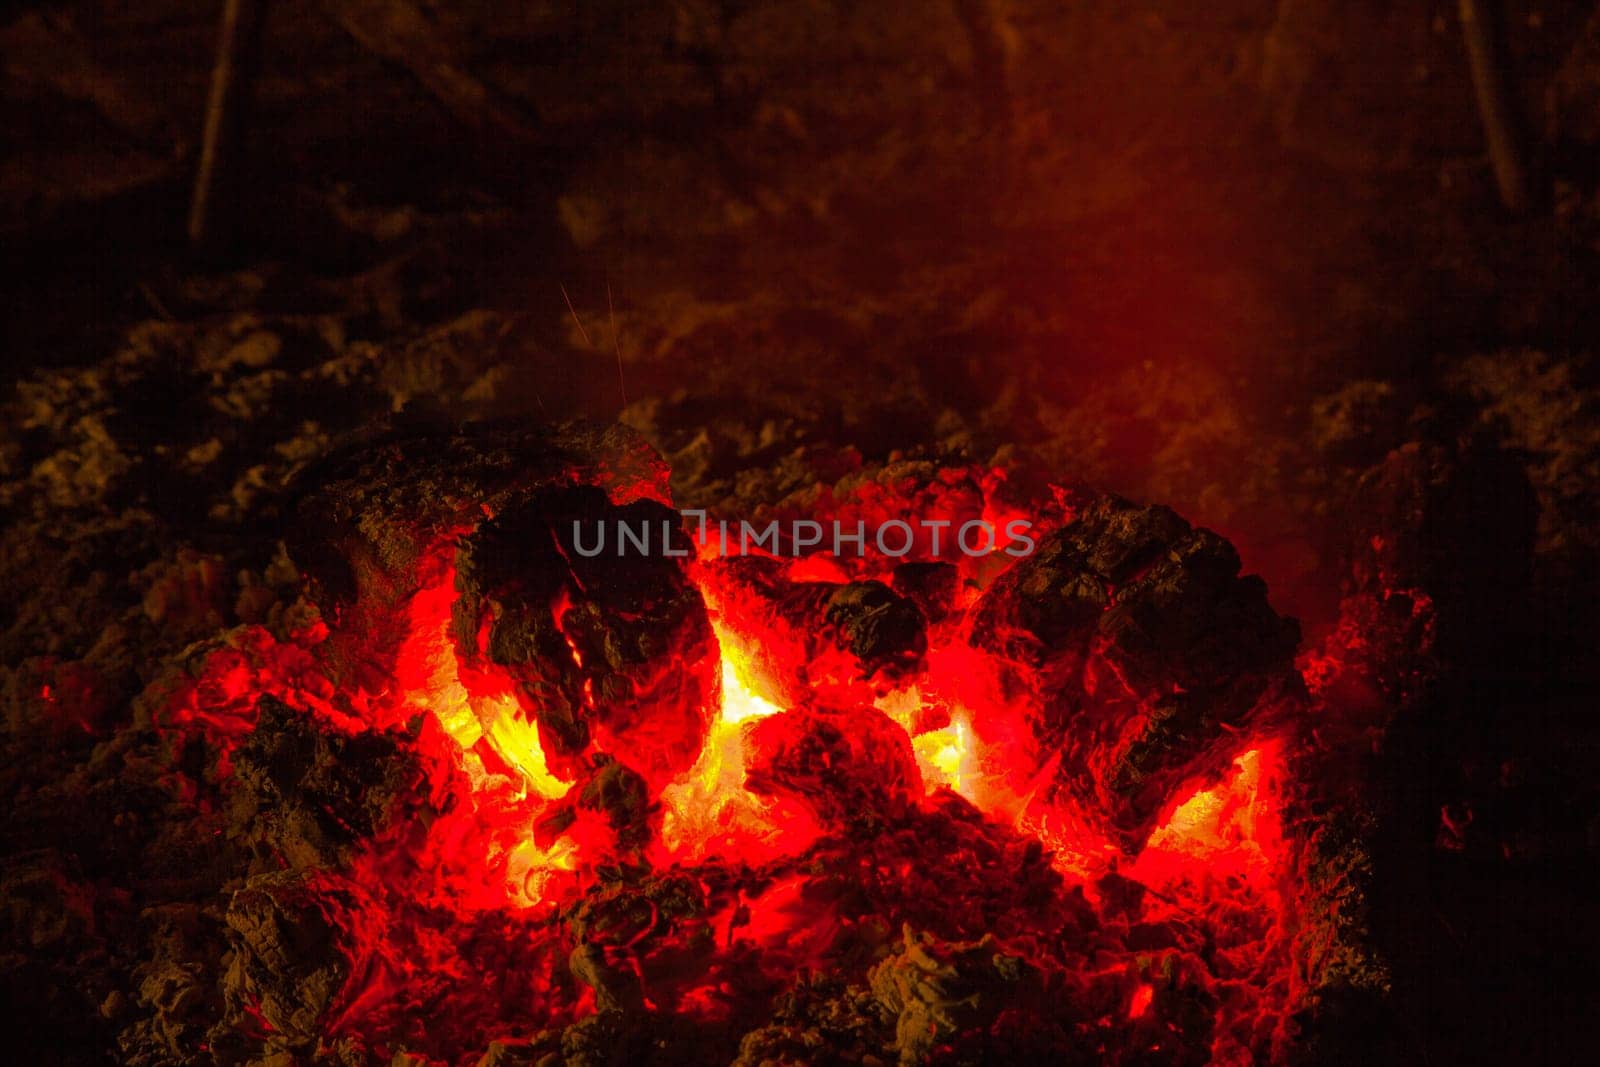 The red hot glowing embers after the flames of a campfire burnt out